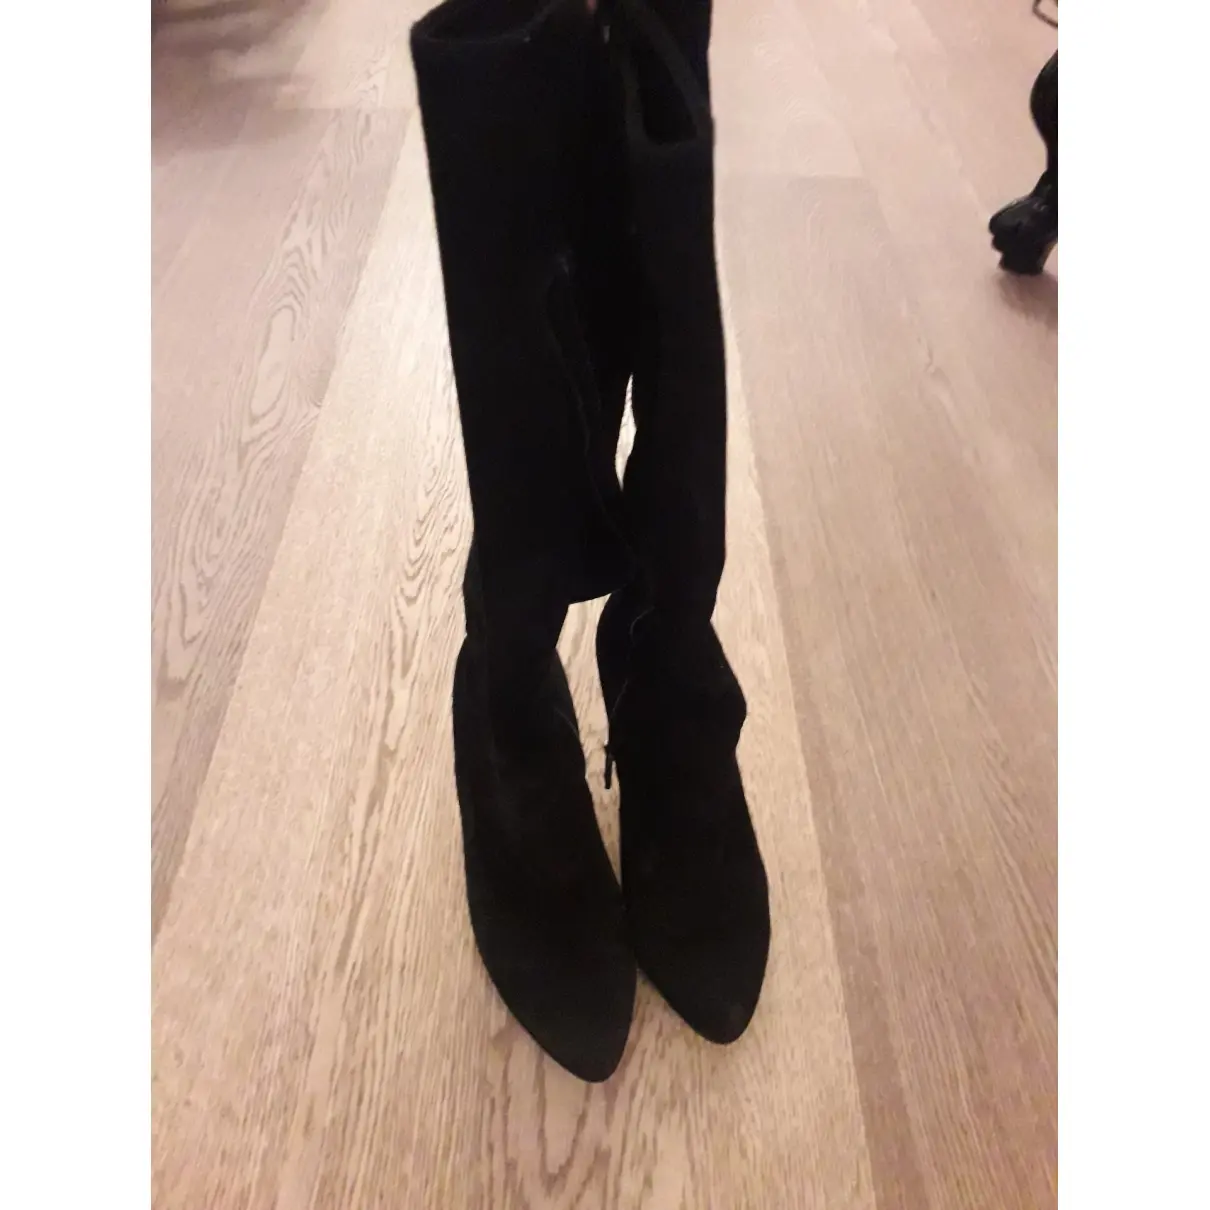 Buy Gucci Boots online